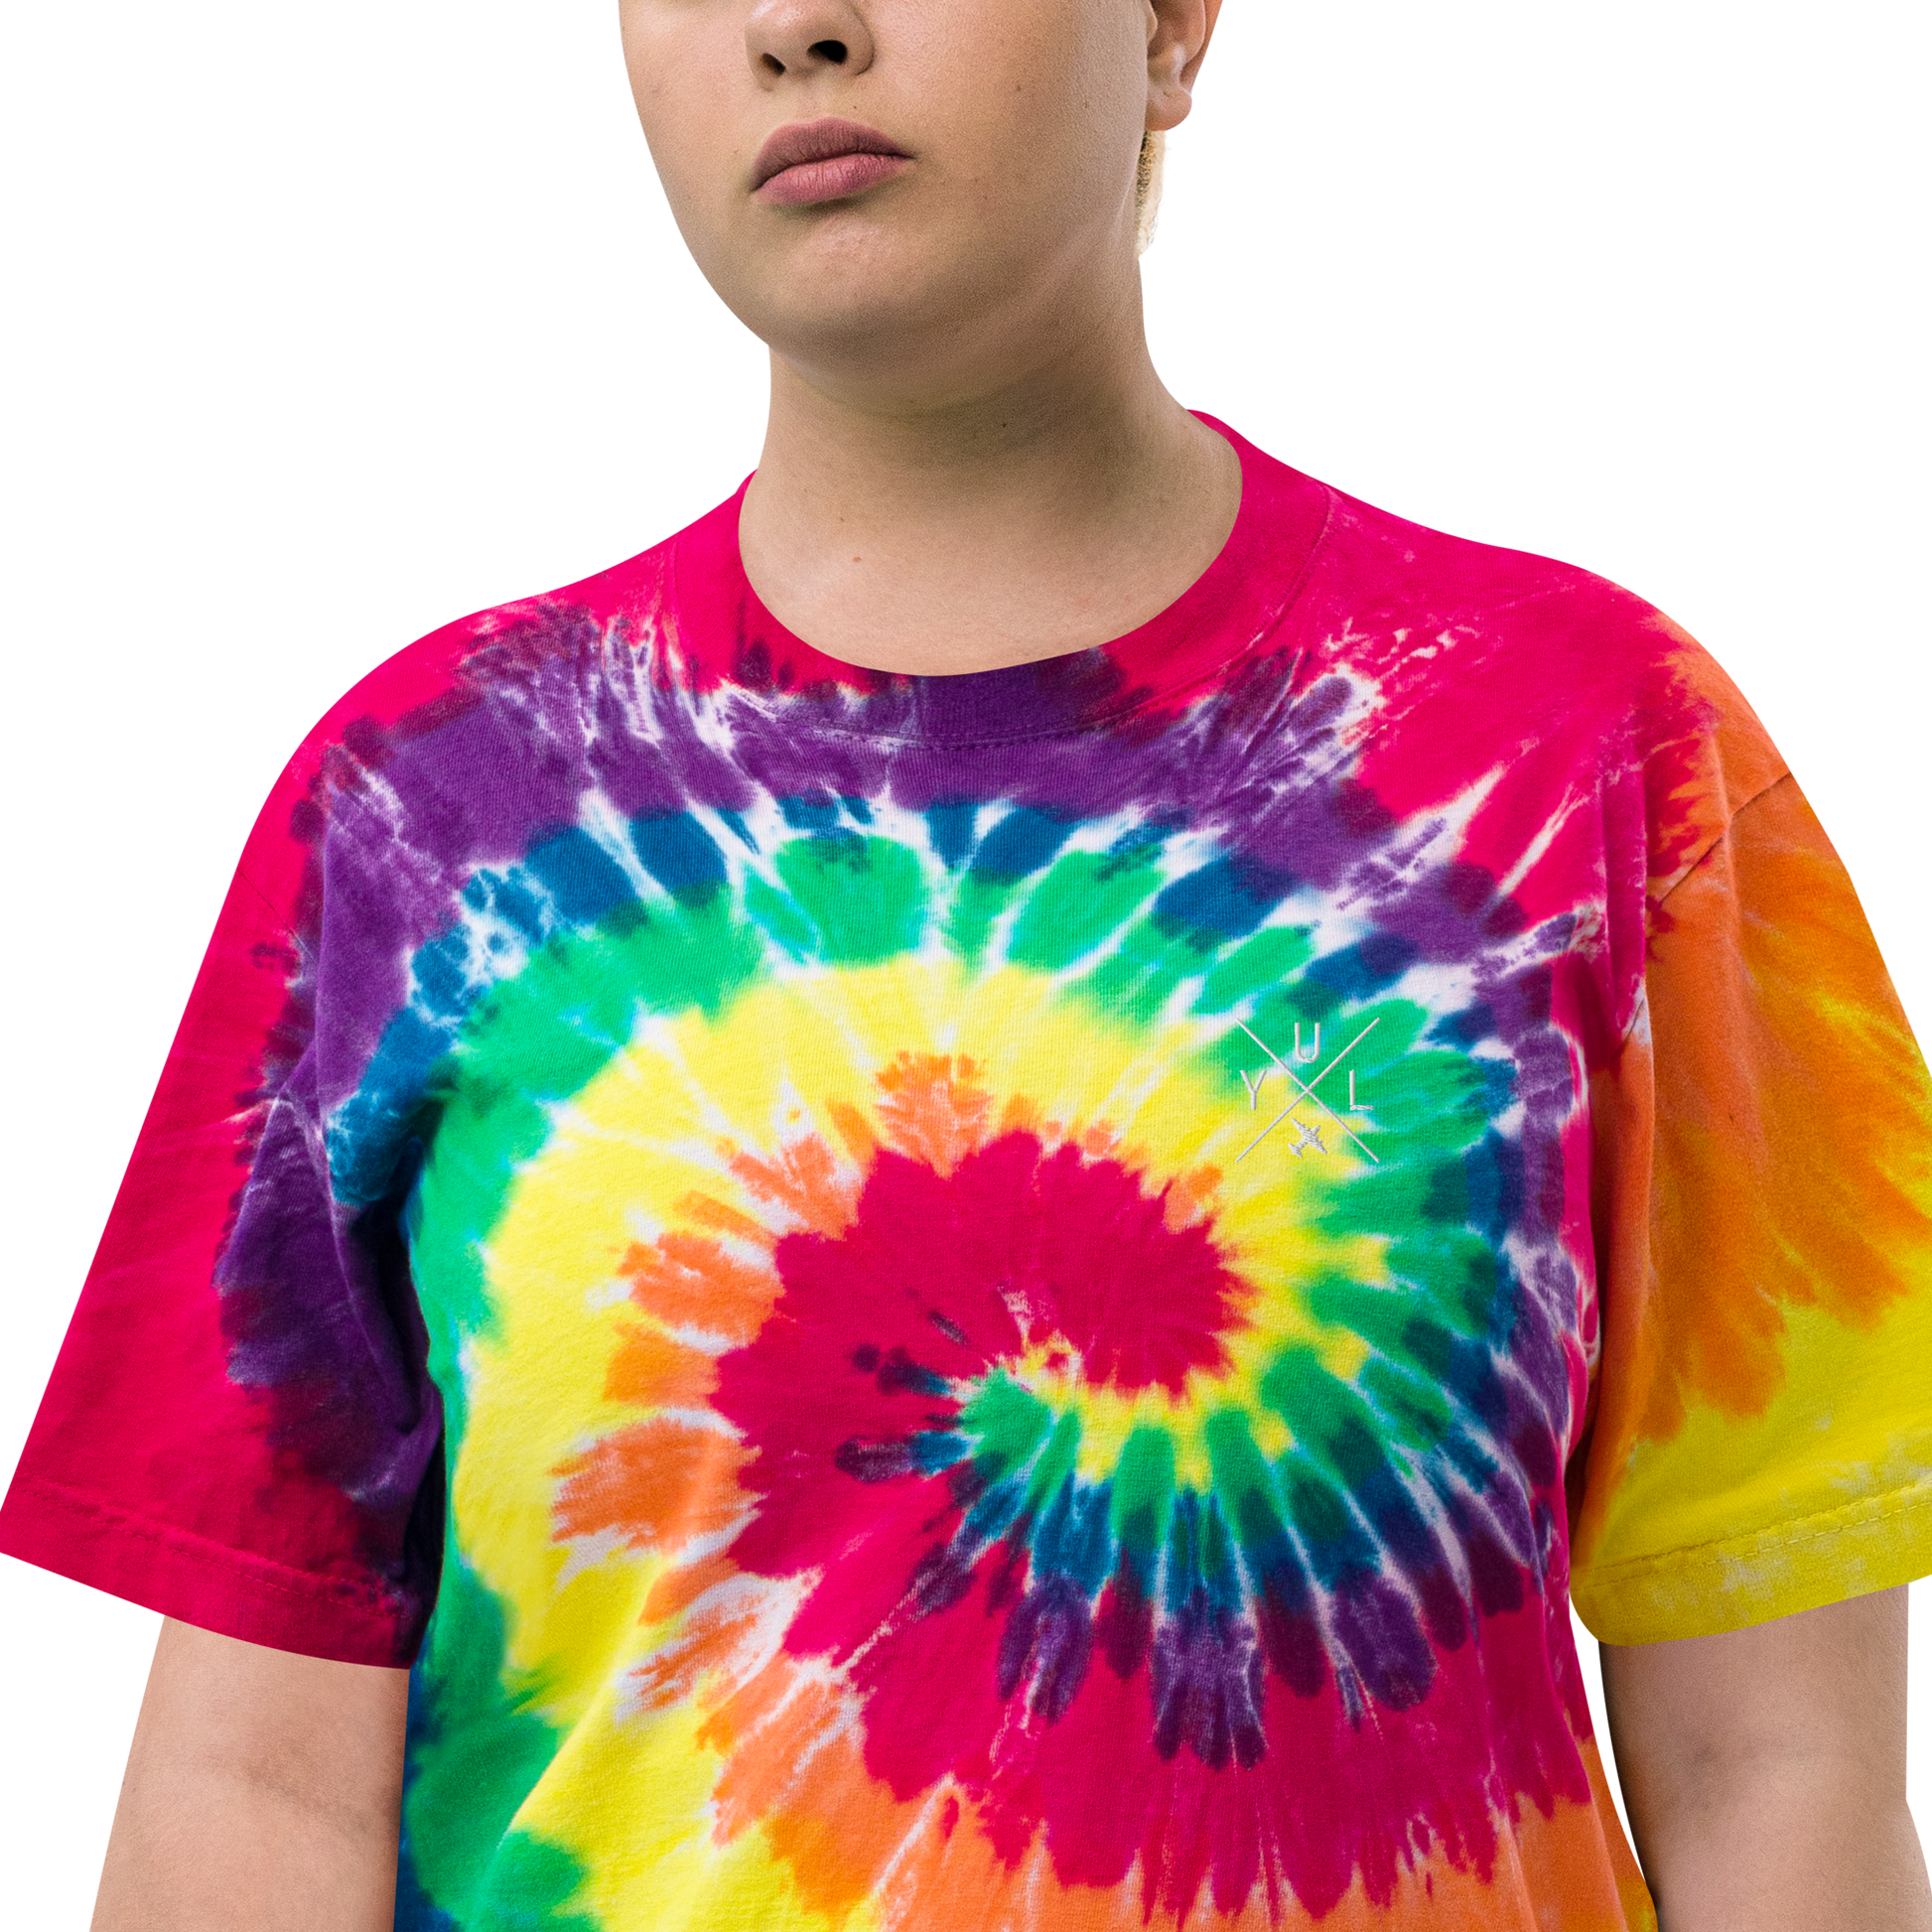 YHM Designs - YUL Montreal Oversized Tie-Dye T-Shirt - Crossed-X Design with Airport Code and Vintage Propliner - White Embroidery - Image 15